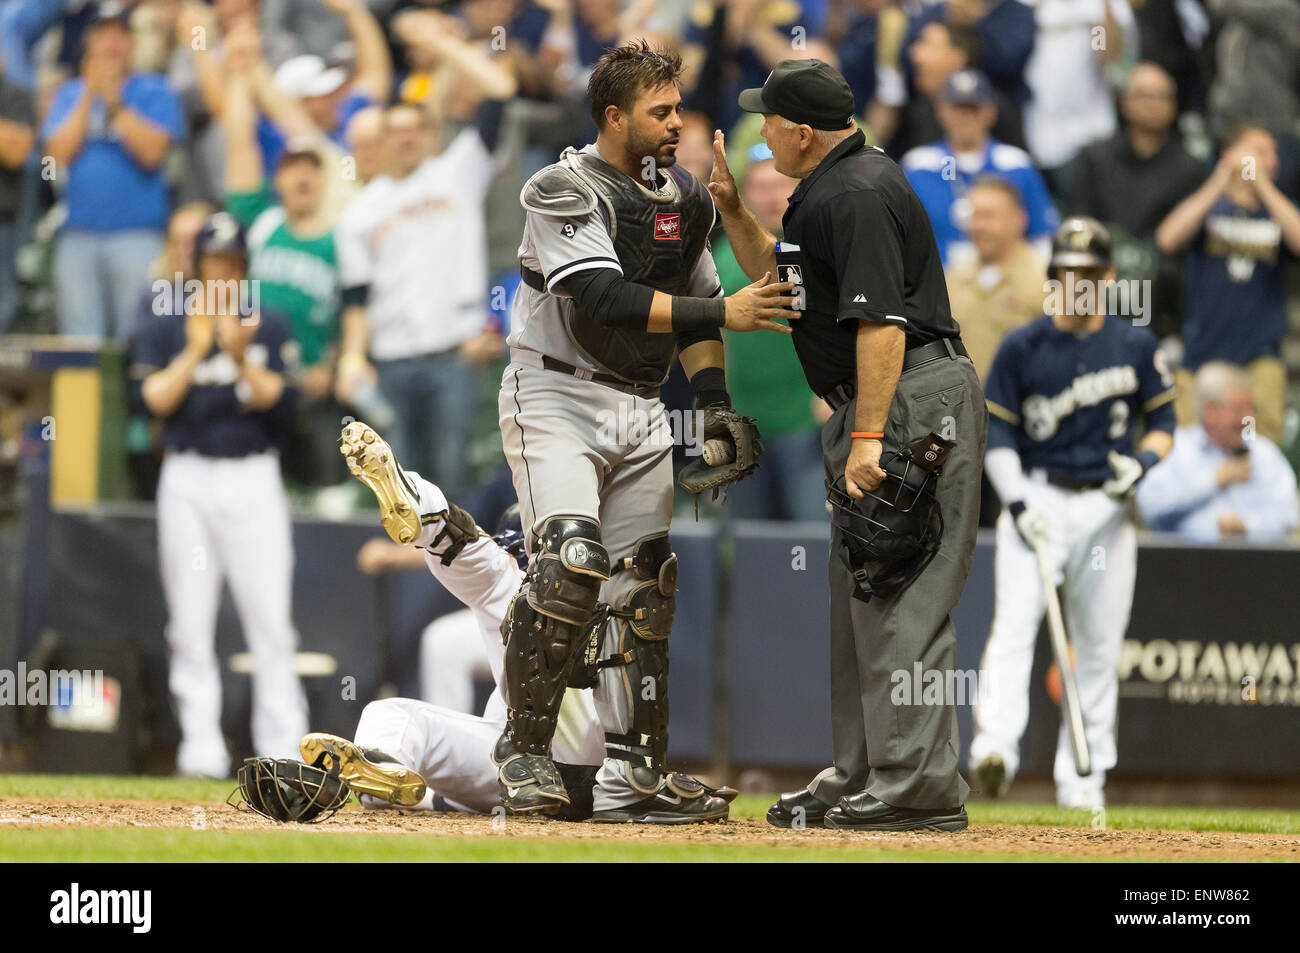 Milwaukee, WI, USA. 11th May, 2015. Chicago White Sox catcher Geovany Soto #58 argues the call by home plate umpire Brian O'Nora during the Major League Baseball game between the Milwaukee Brewers and the Chicago White Sox at Miller Park in Milwaukee, WI. John Fisher/CSM/Alamy Live News Stock Photo